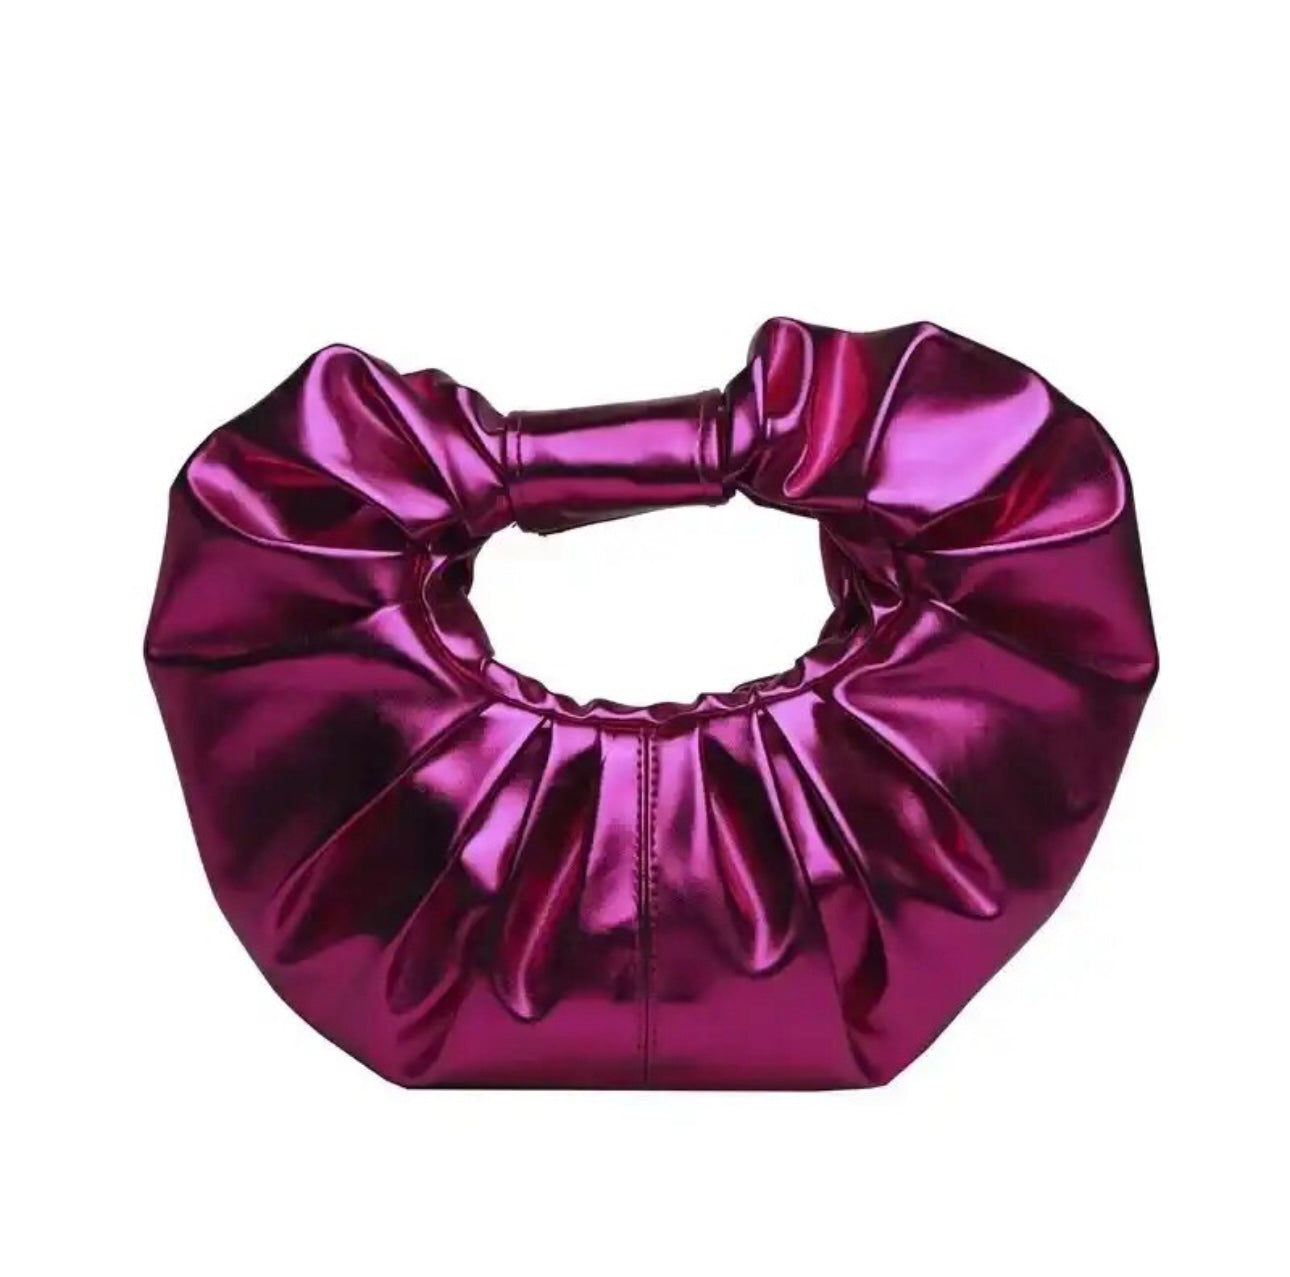 The Candy Color Handbags (All Colors Available)